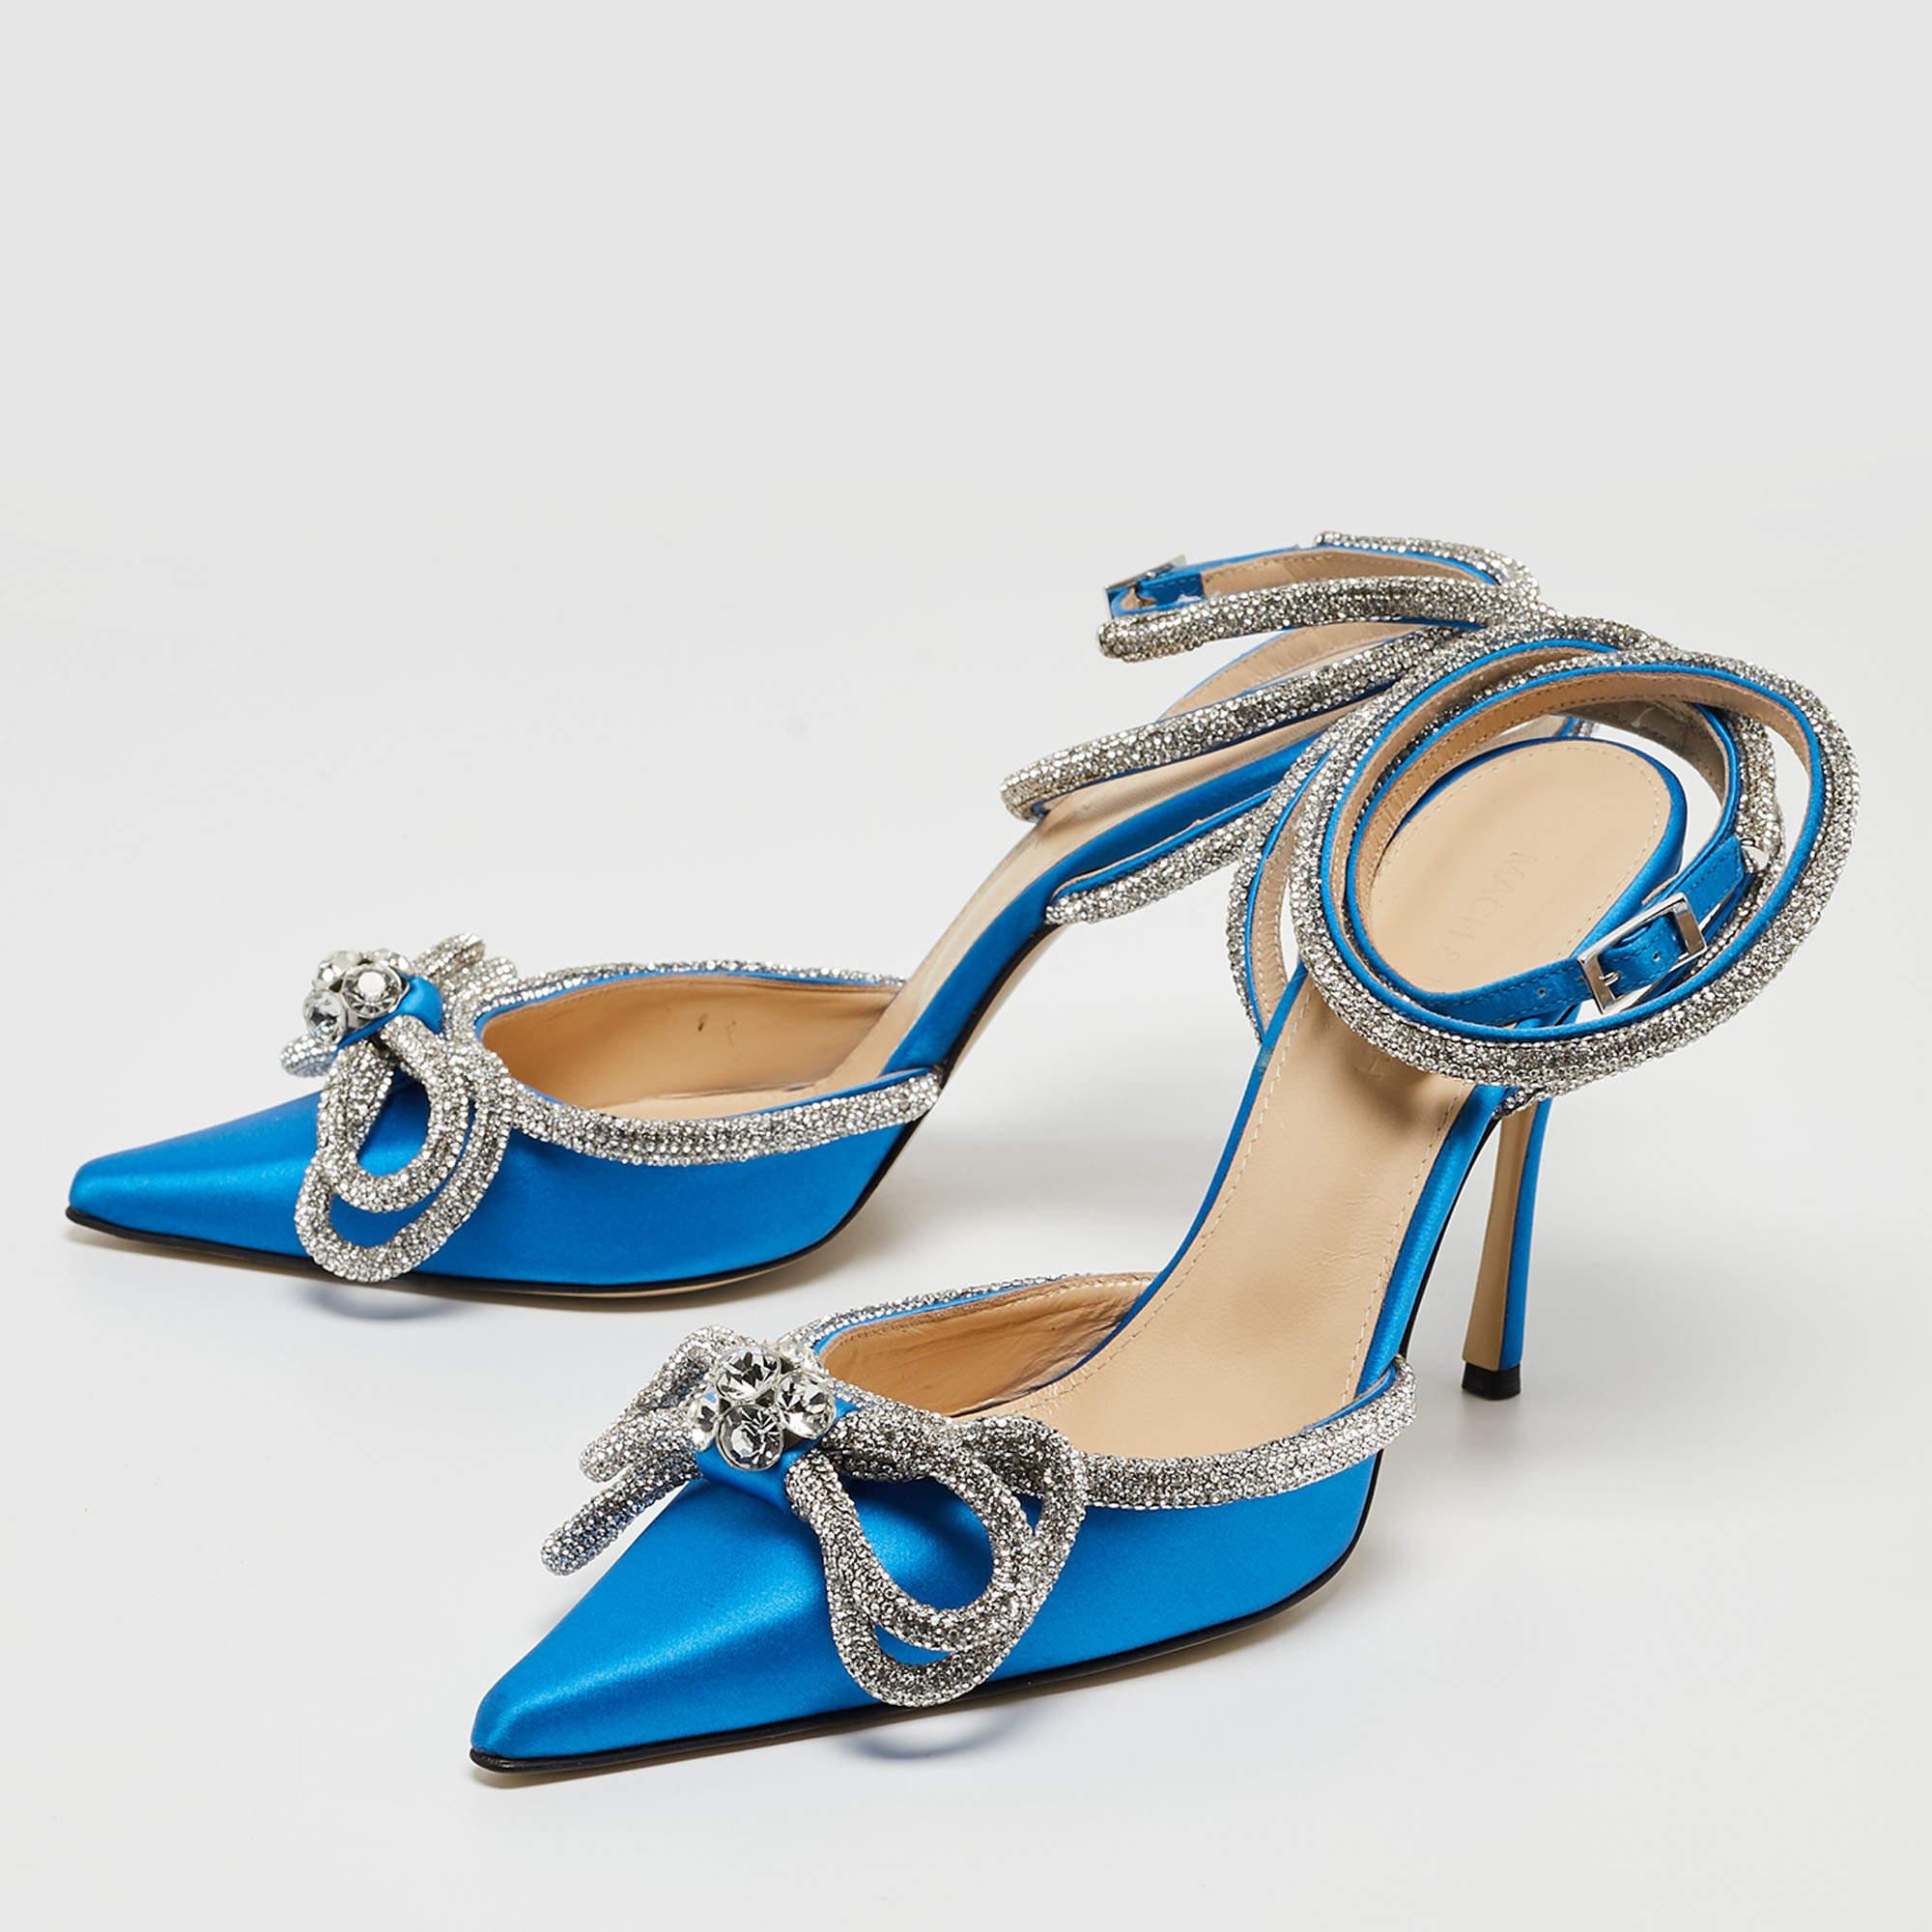 Mach & Mach Blue Satin Crystal Embellished Ankle Wrap Pointed Toe Pumps Sze 39.5 1